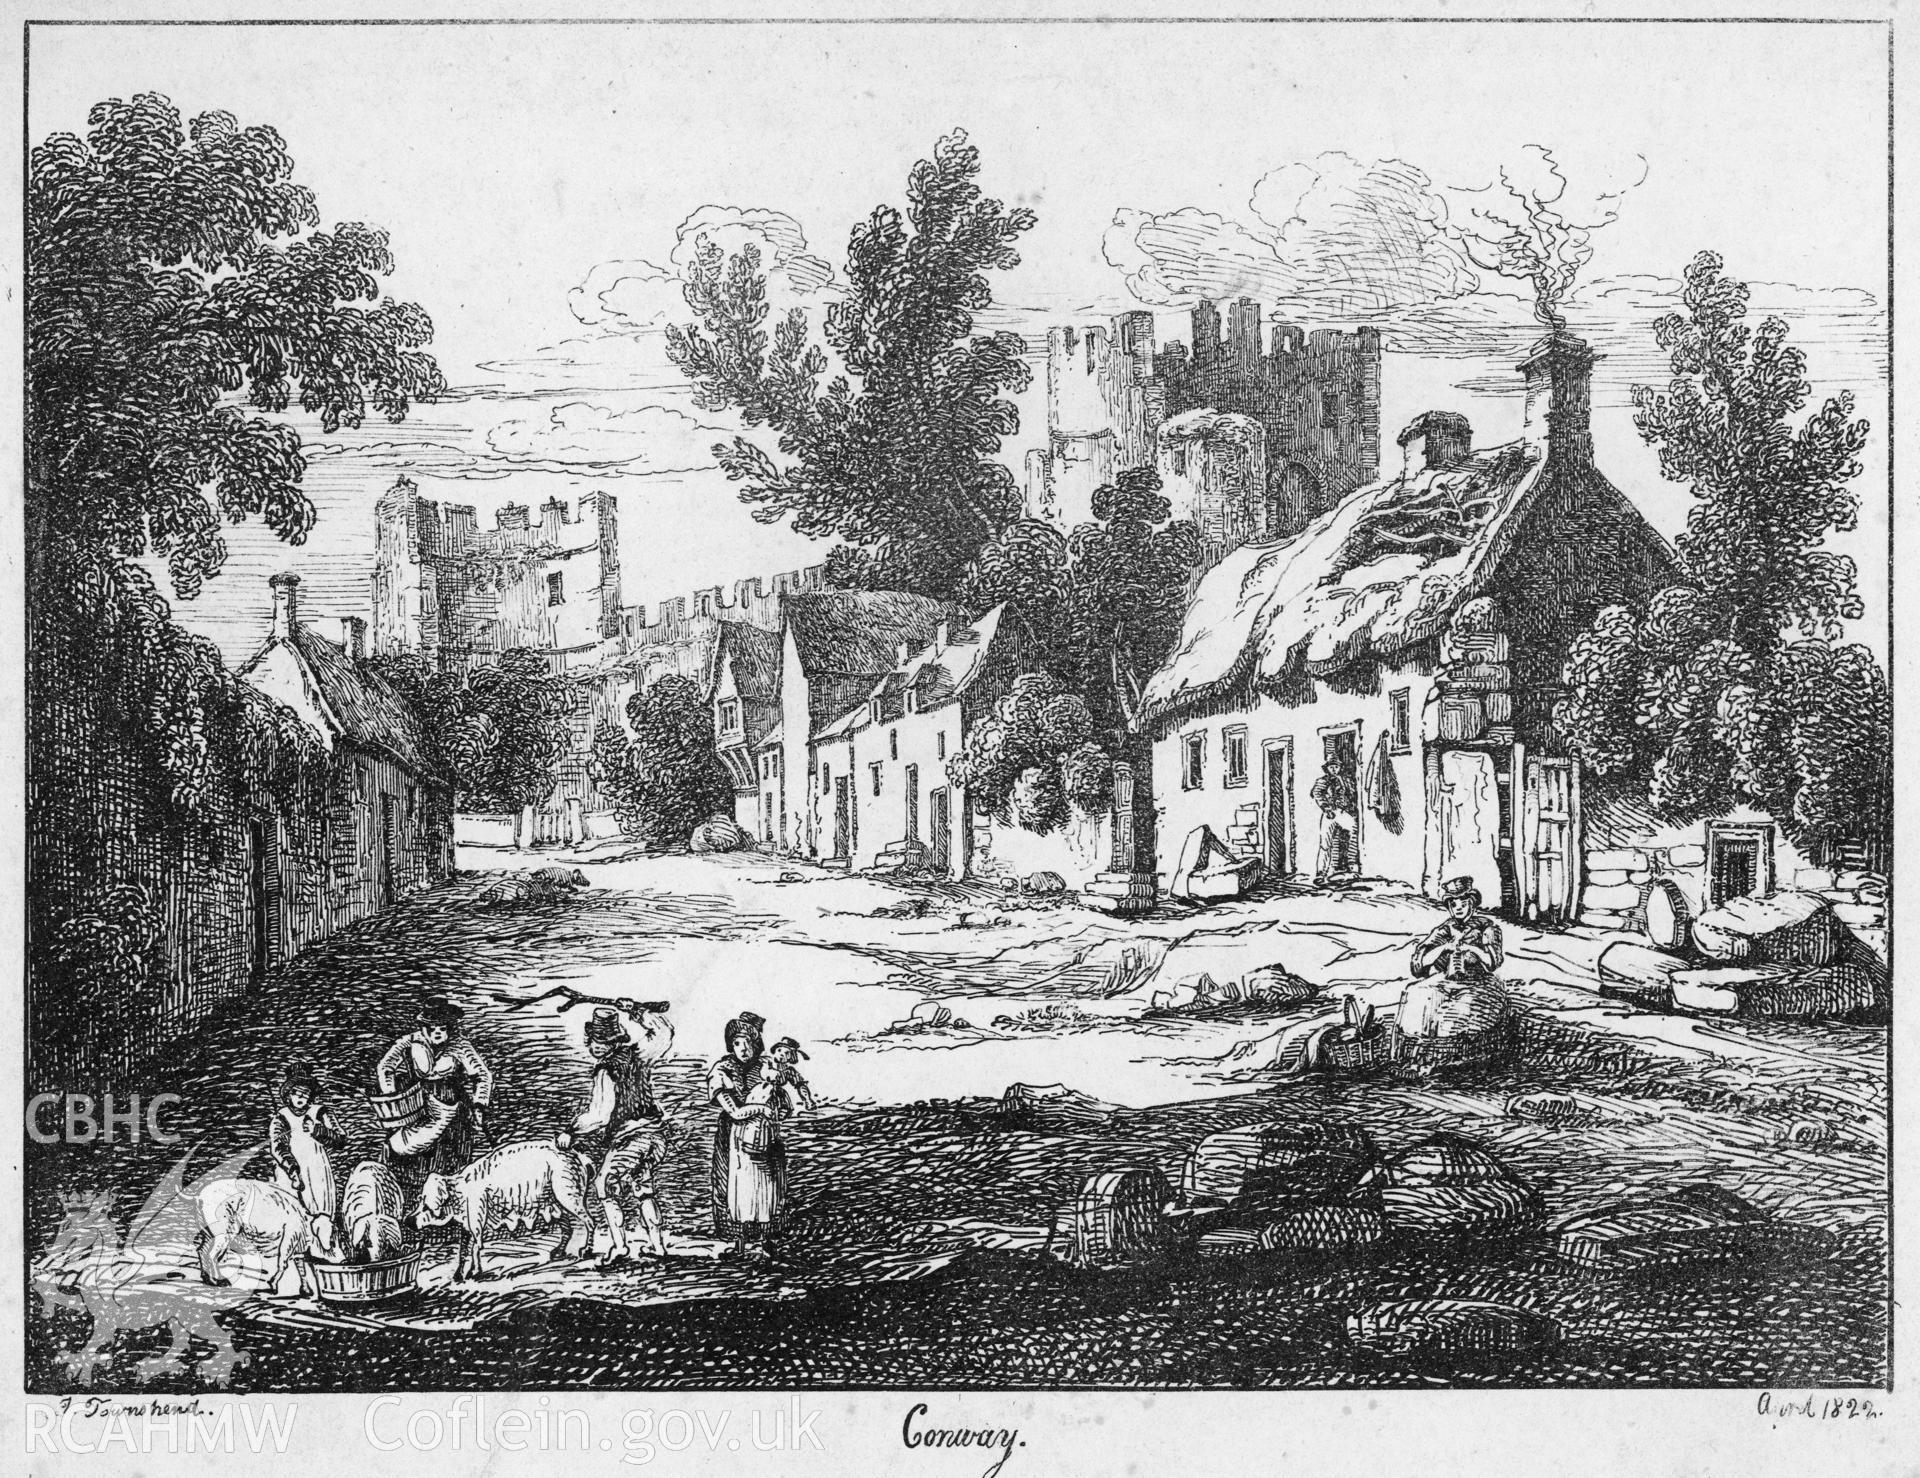 Digital copy of an engraving by John Townshend, showing street scene in Conwy, dated April 1822.